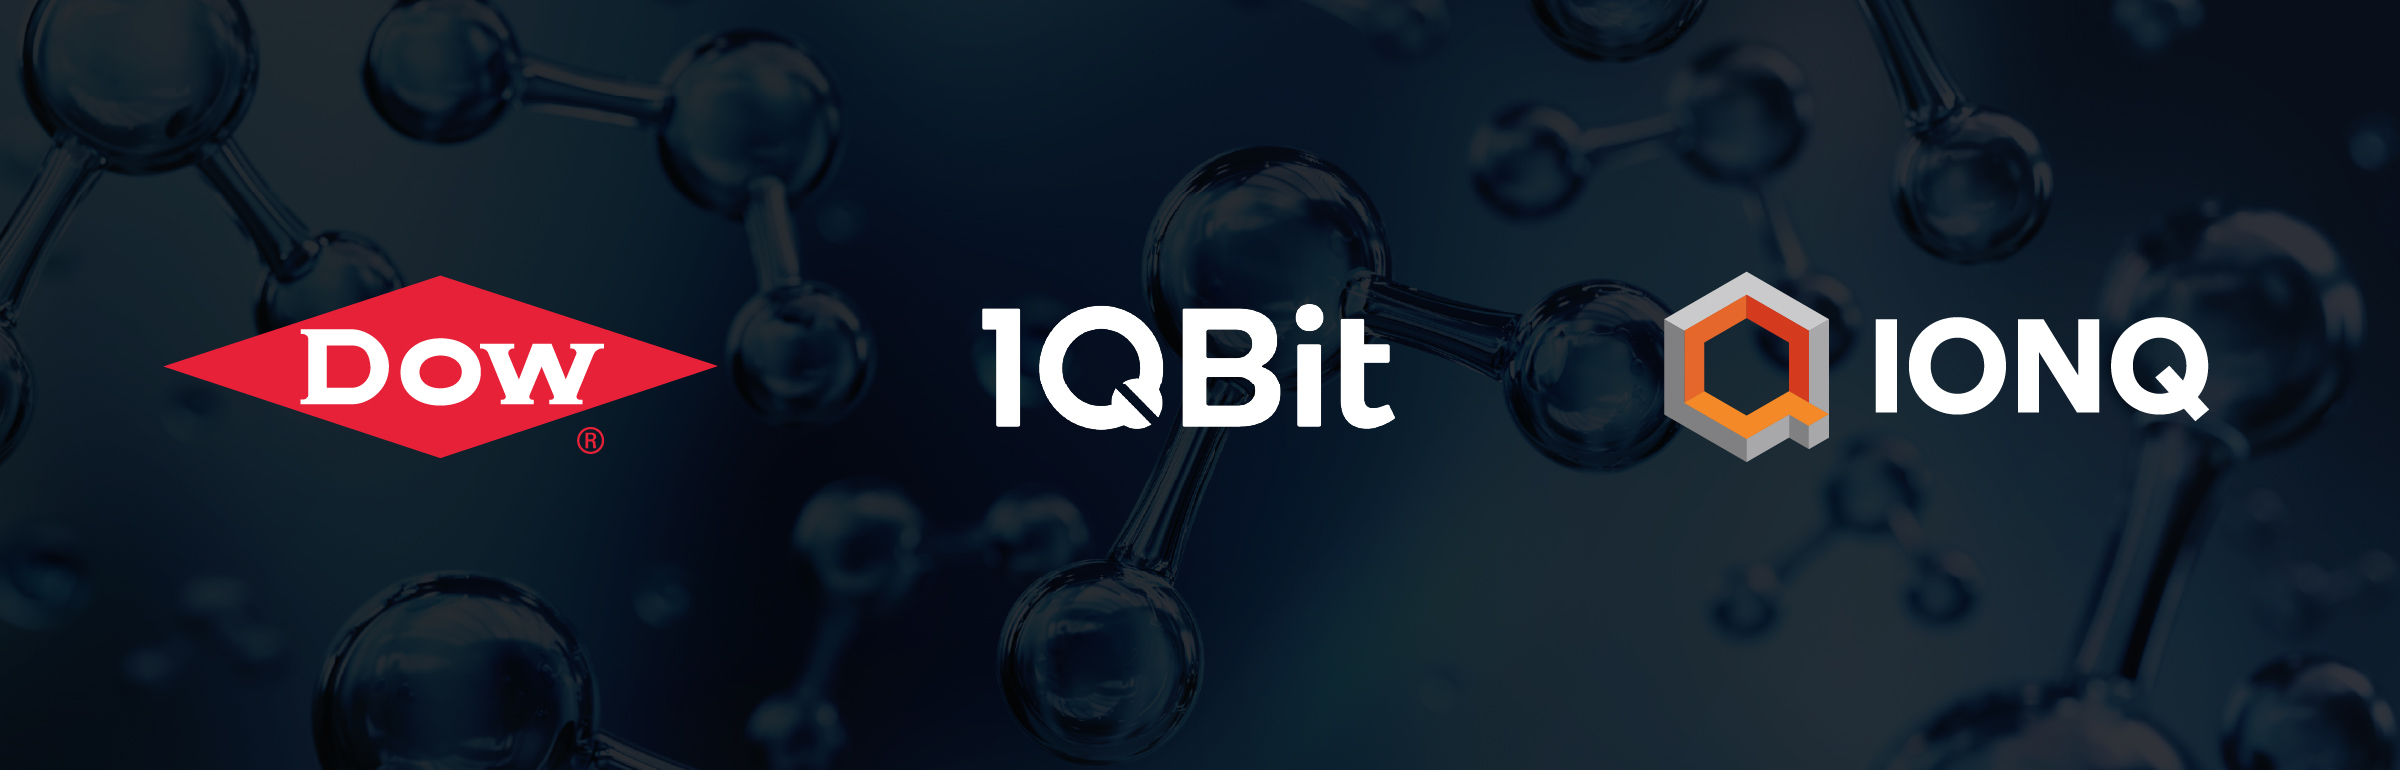 1QBit, Dow, and IonQ logos in front of molecule illustration